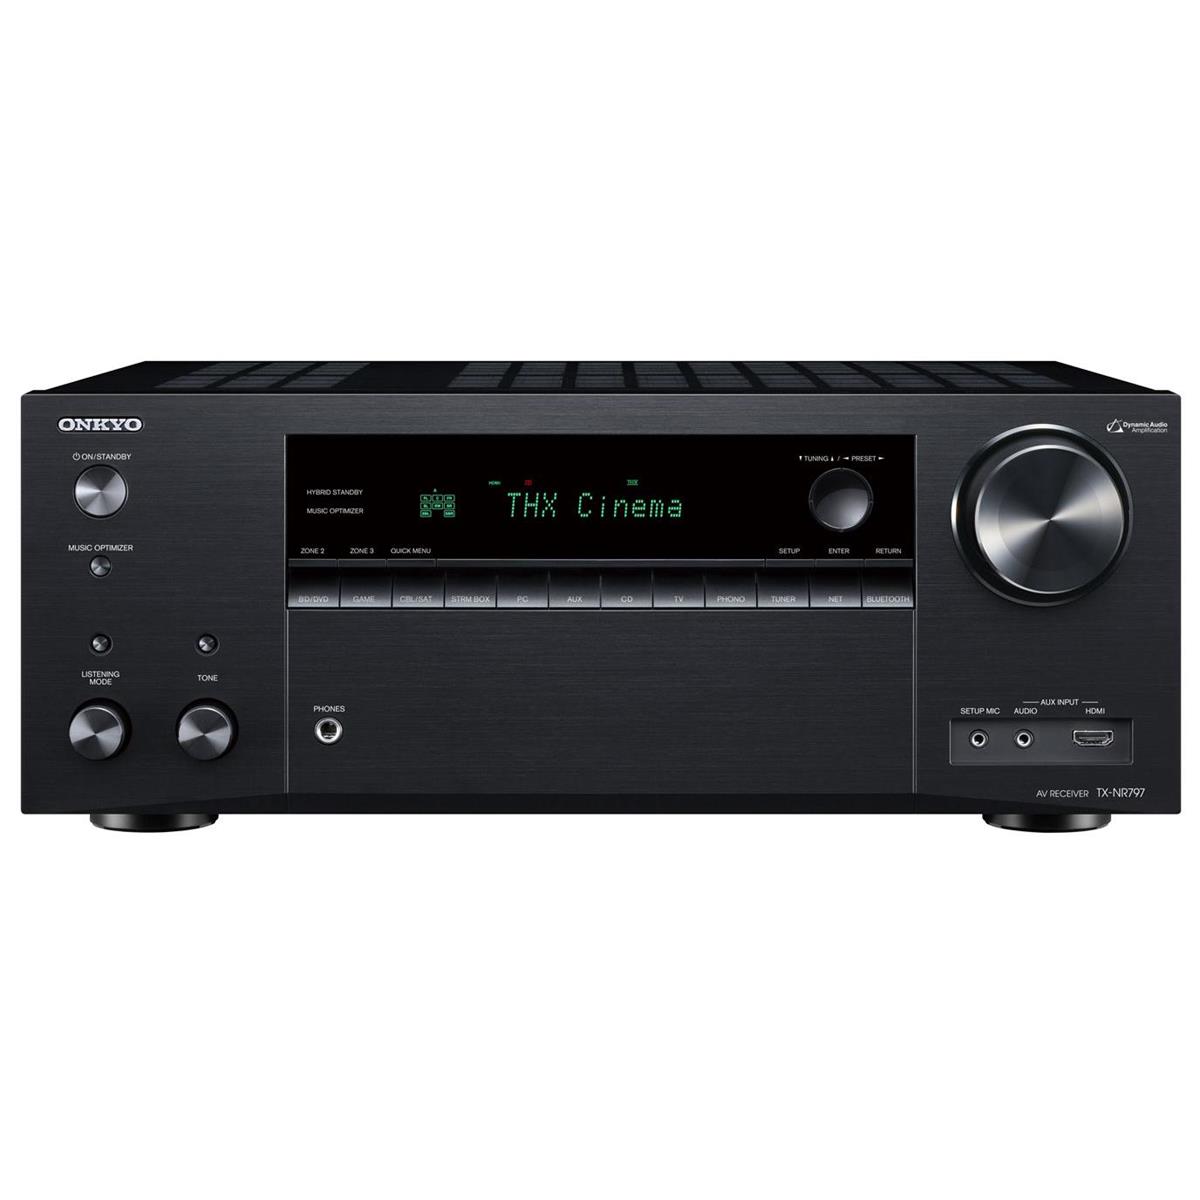 Image of Onkyo TX-NR797 9.2-Channel Network A/V Receiver